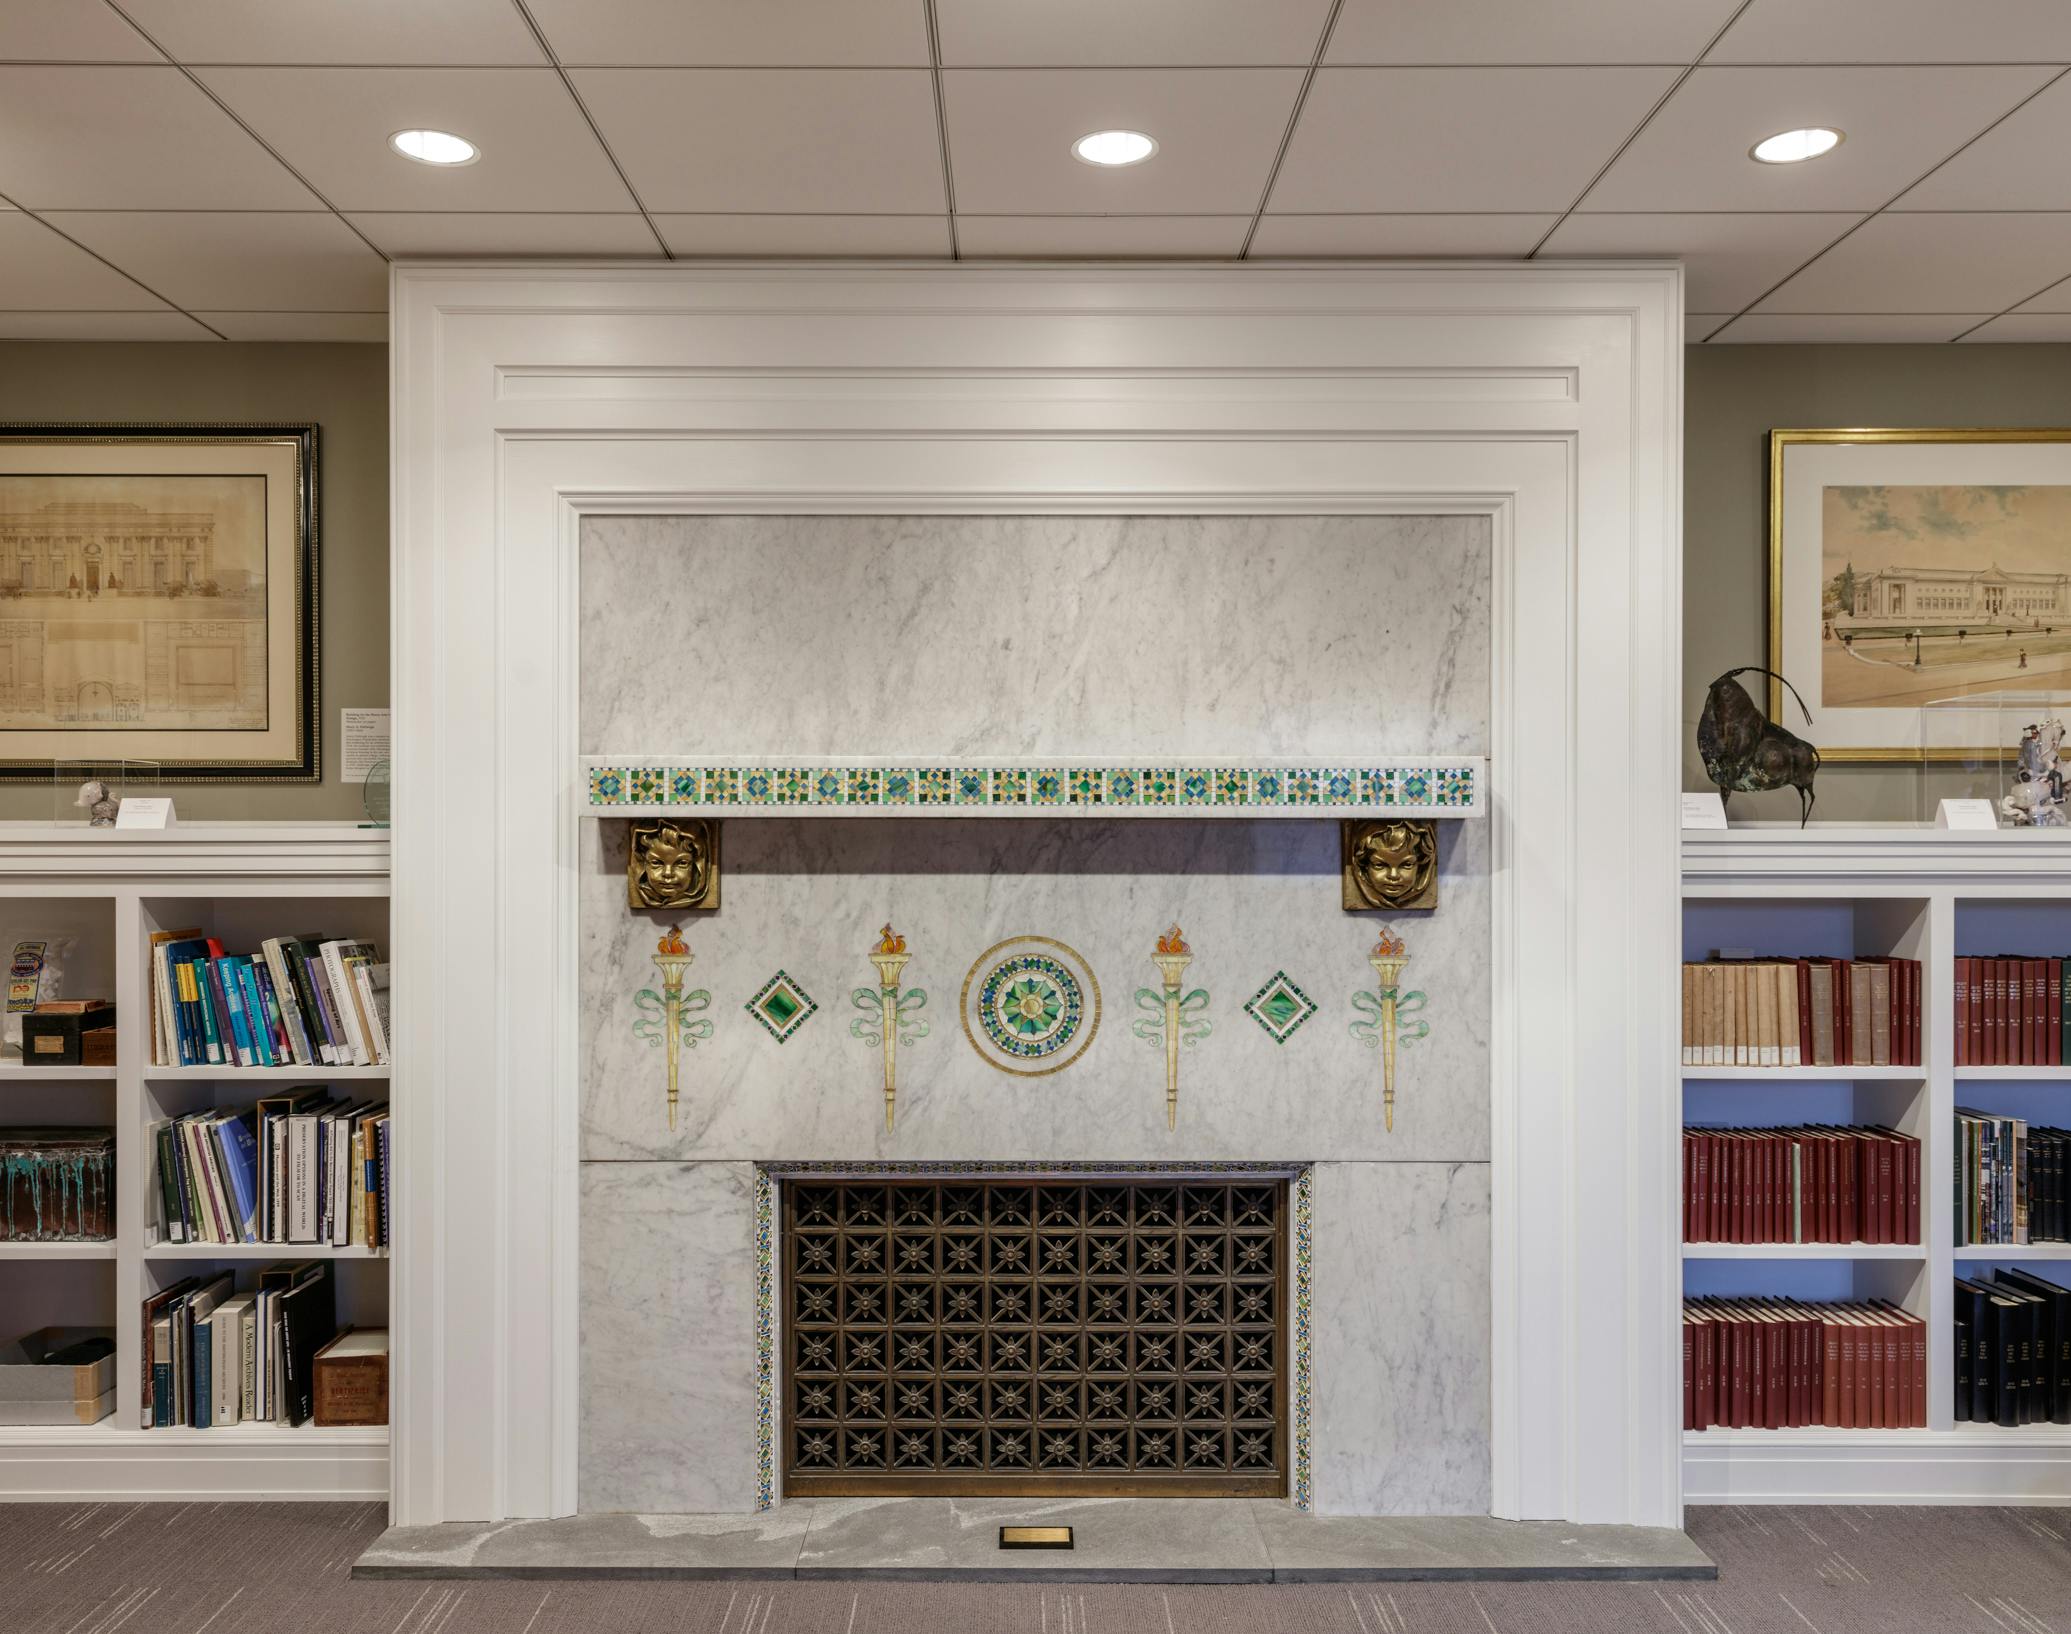 The Museum Archives with Tiffany fireplace in foreground and bookshelves to each side